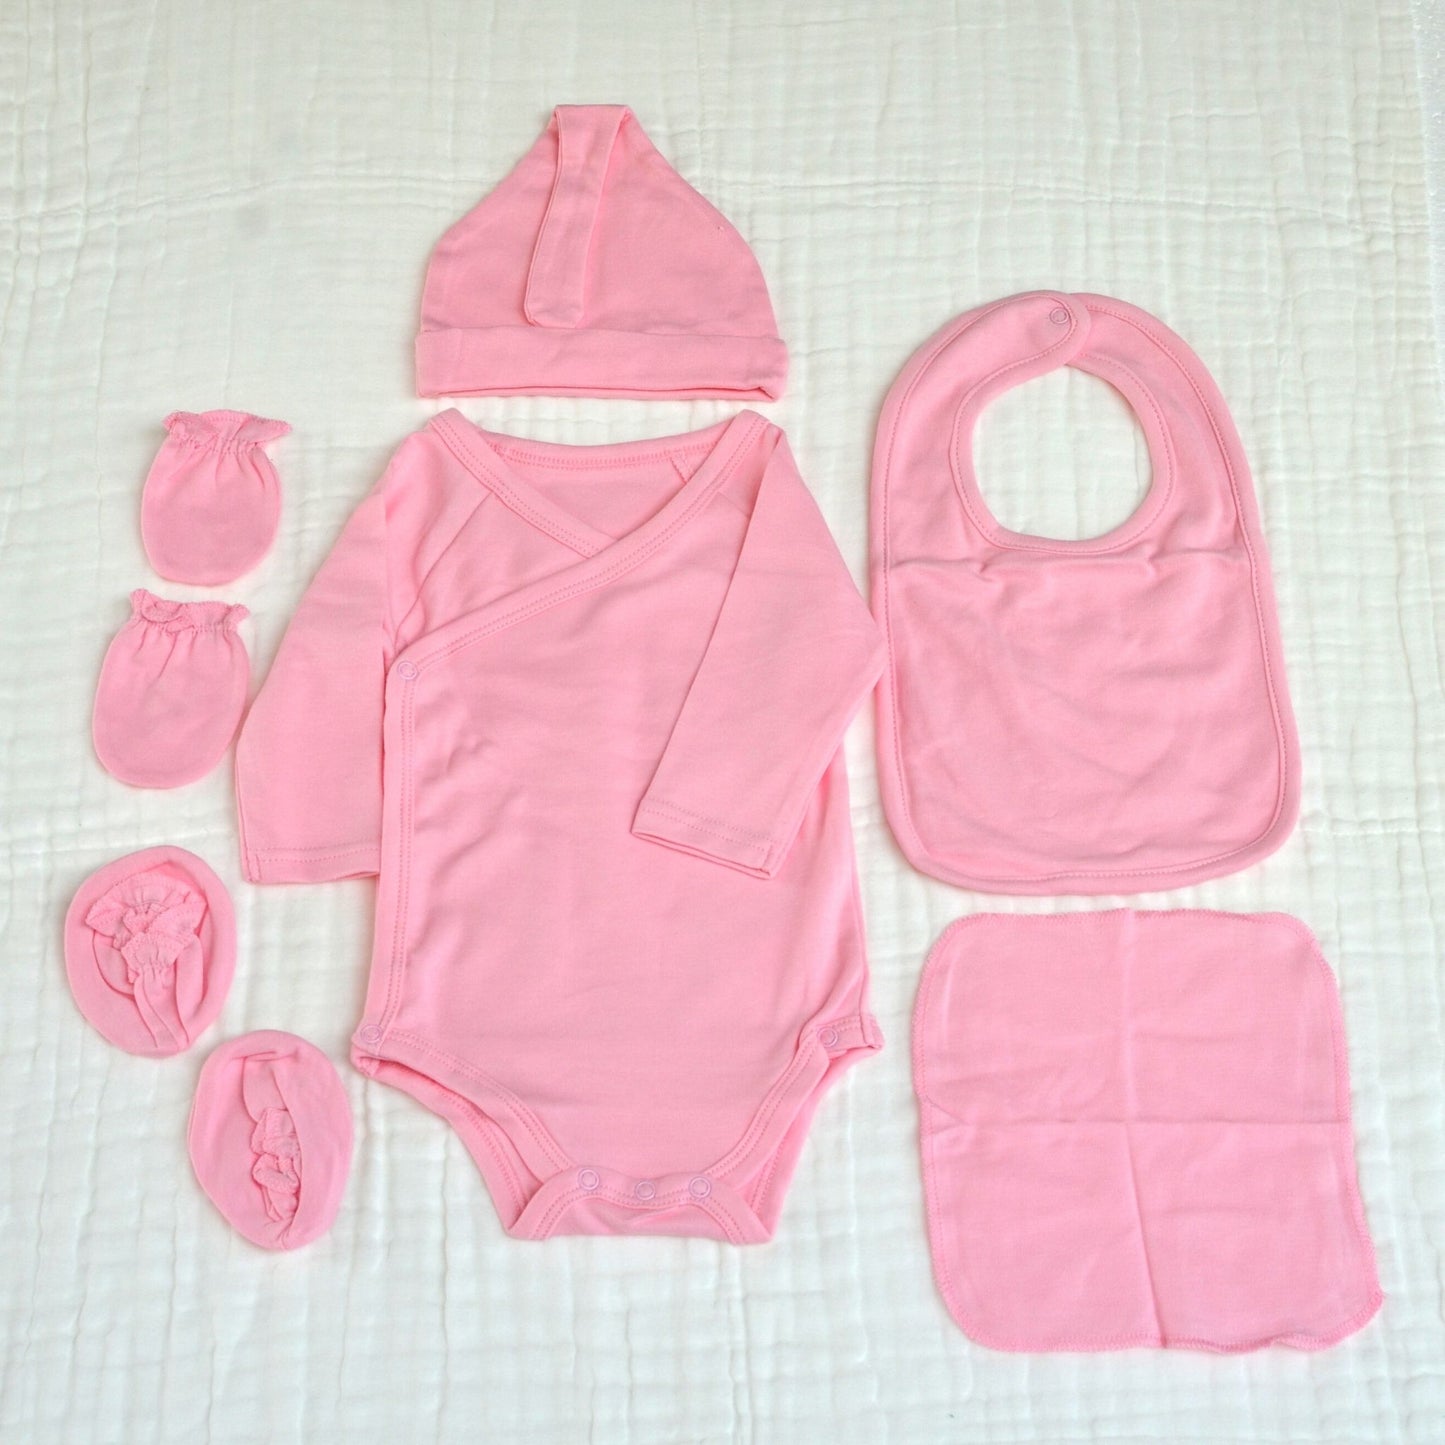 6 Piece Suit Set - 0 to 3 Month Size Take Home Outfit